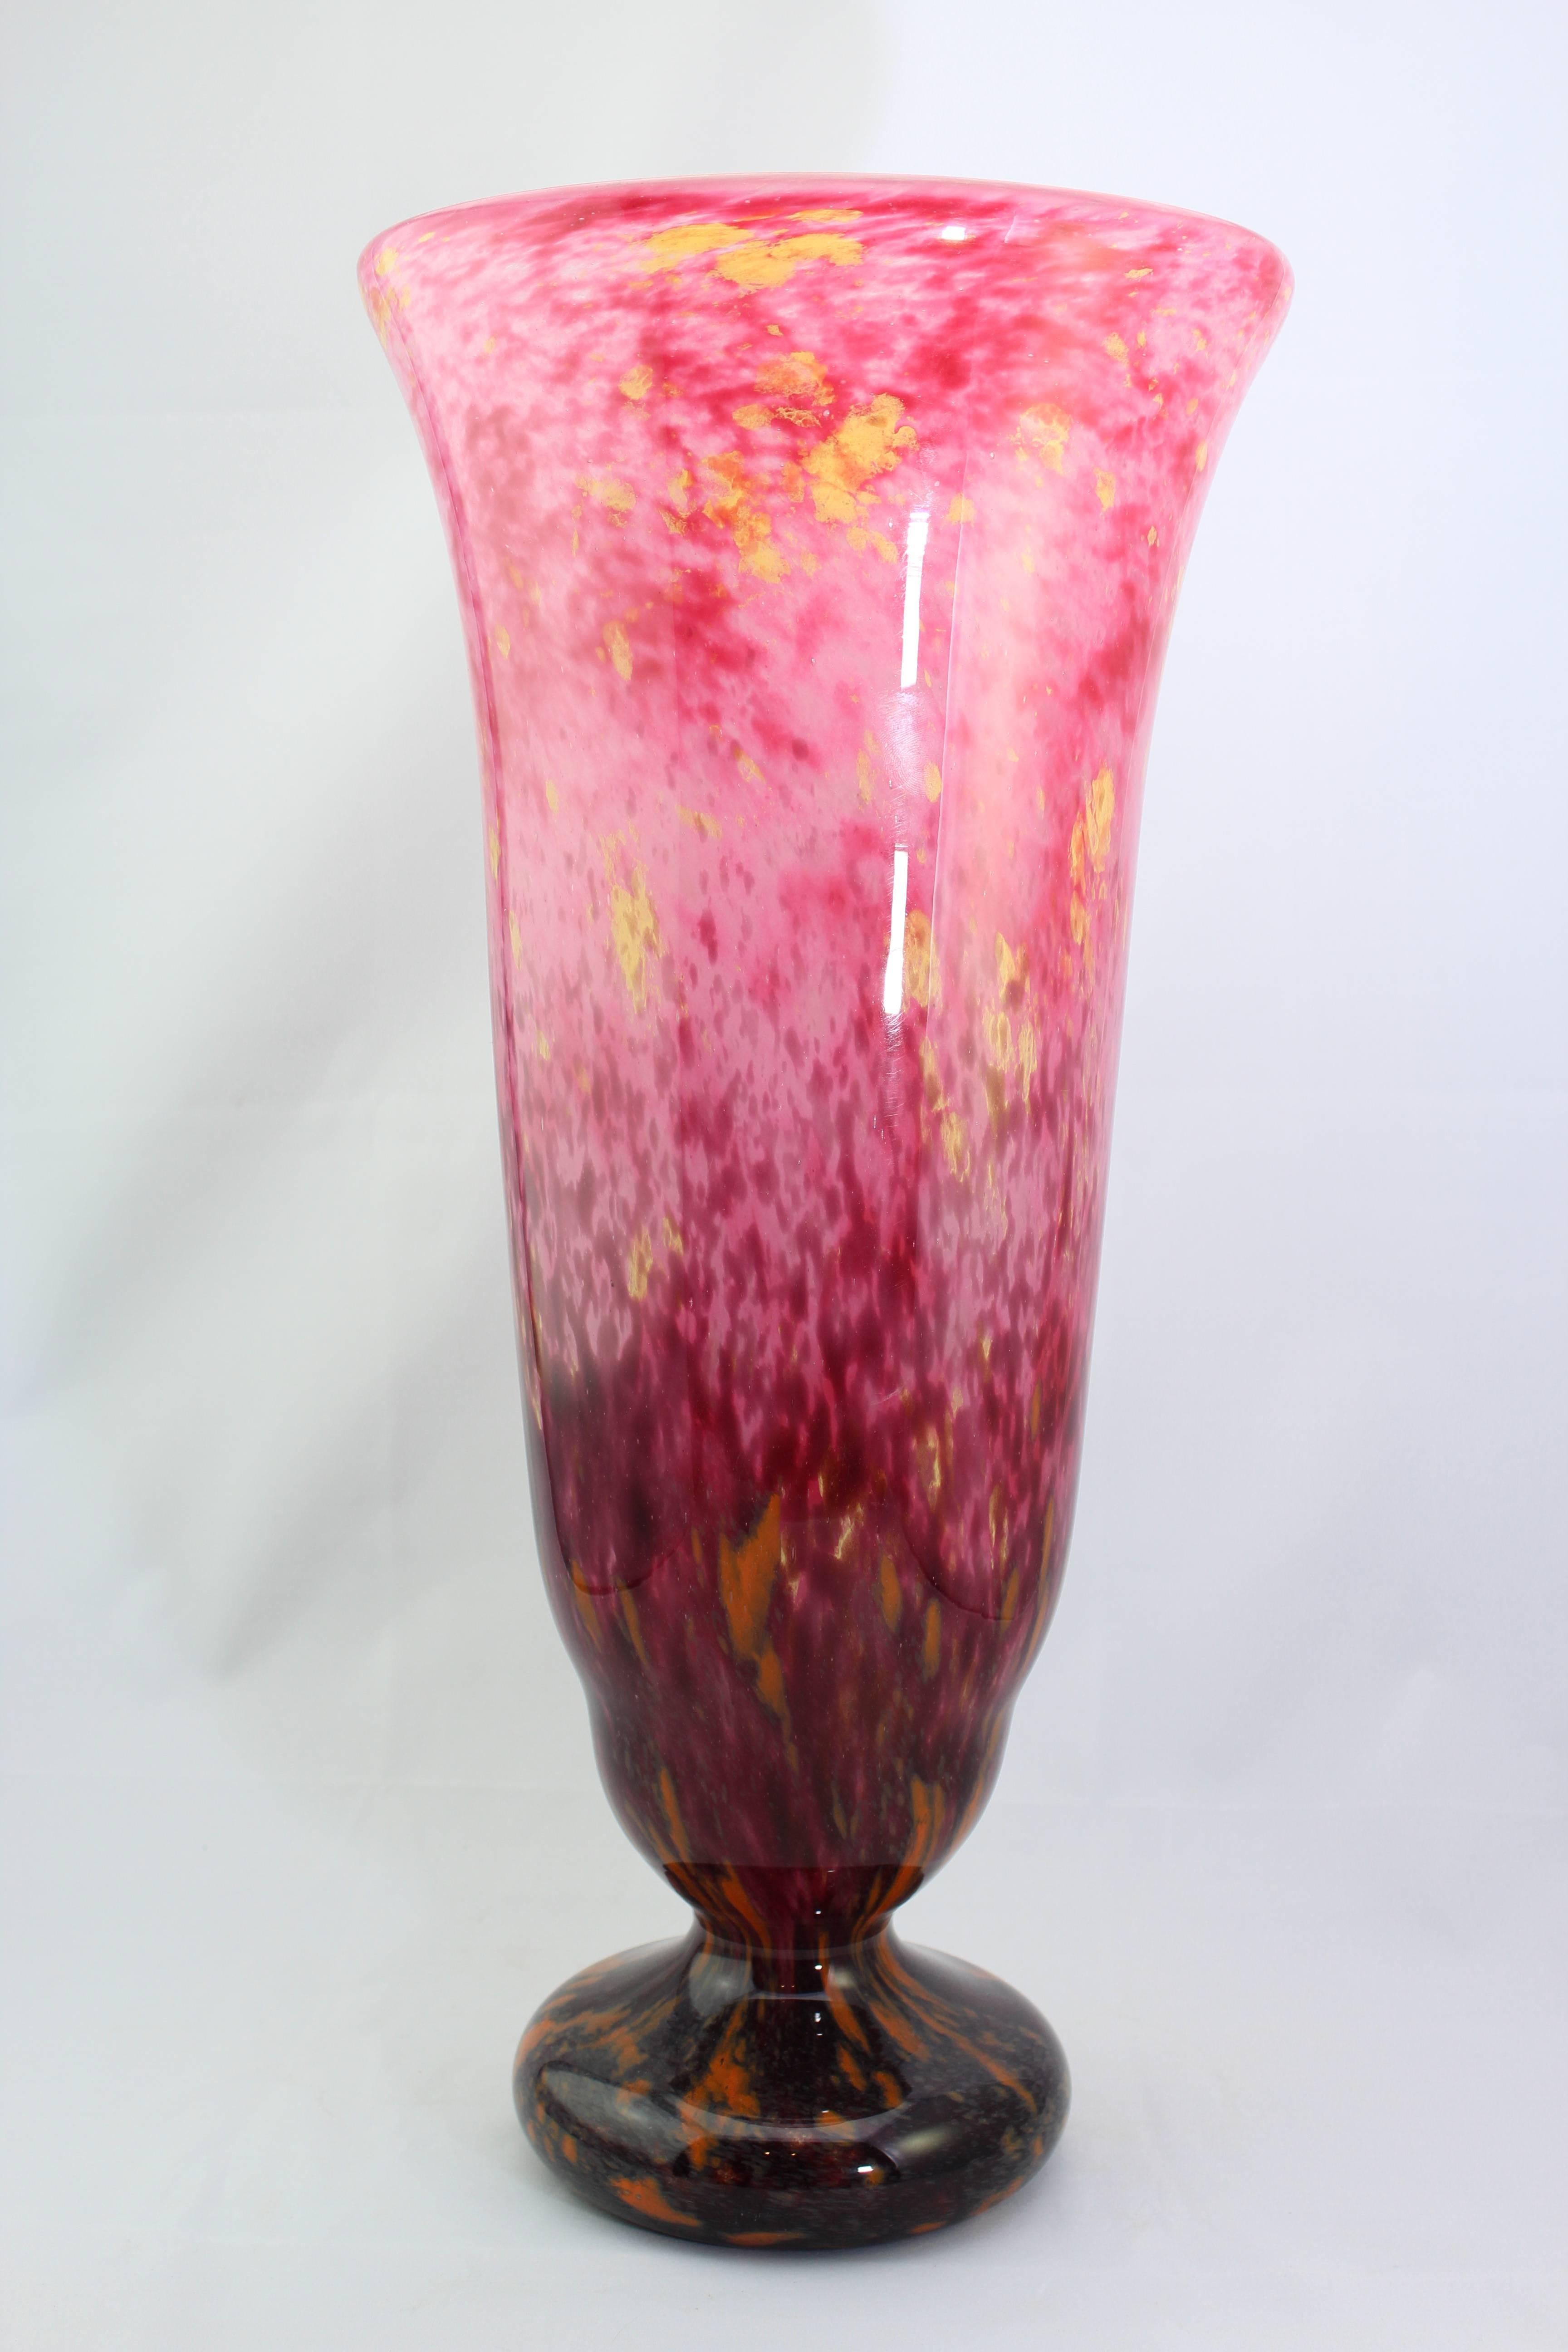 Schneider, Verre Francais art glass vase, 20th century, Art Deco.

Signed: On base "SCHNEIDER," under base "France".

Measurements: 19" H x 9" diameter.

Condition is good with exception of five contact internal